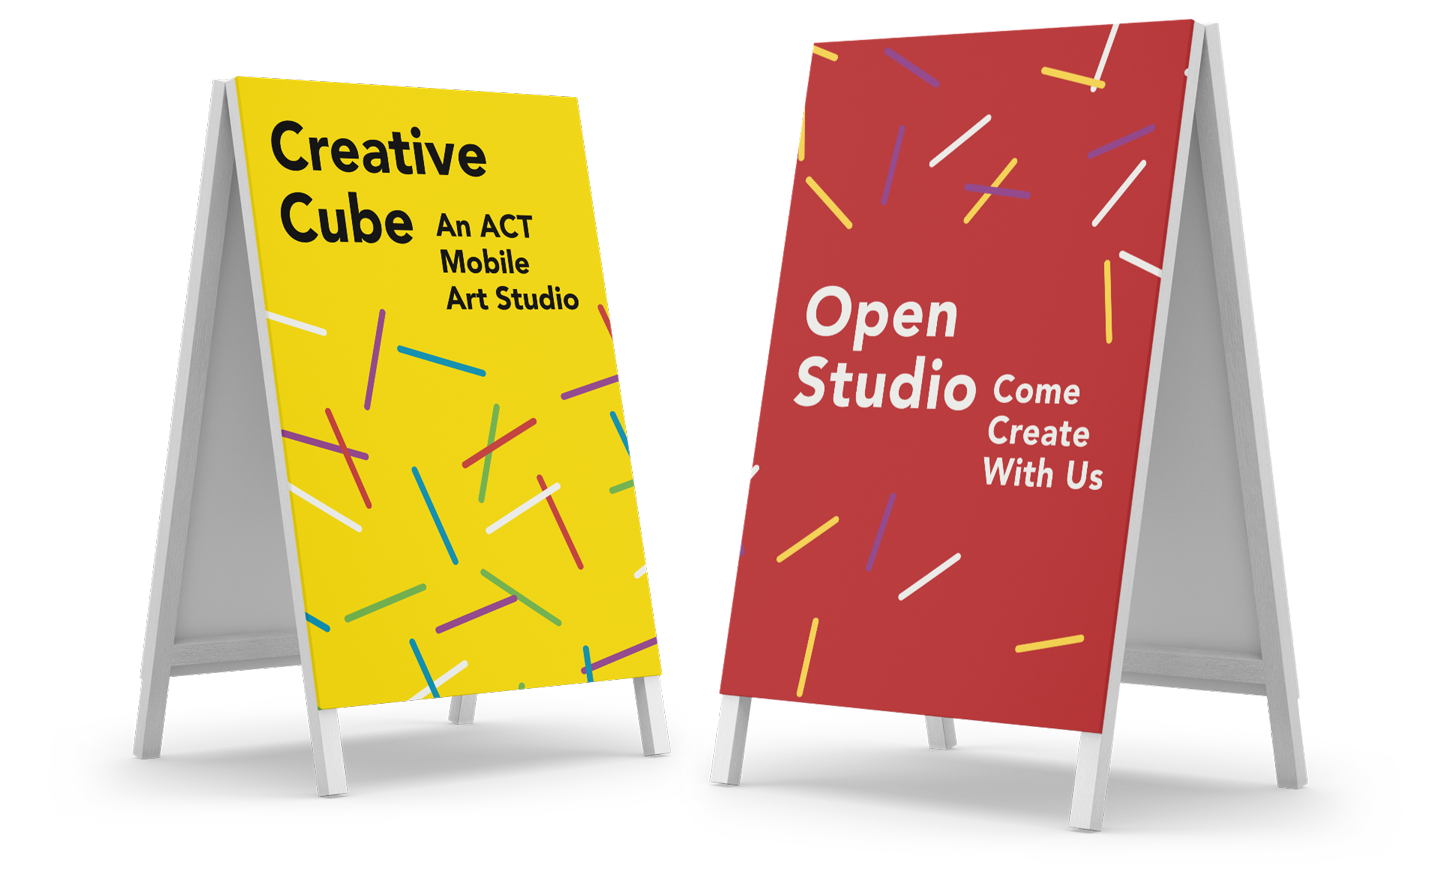 Creative Cube and Open Studio signage